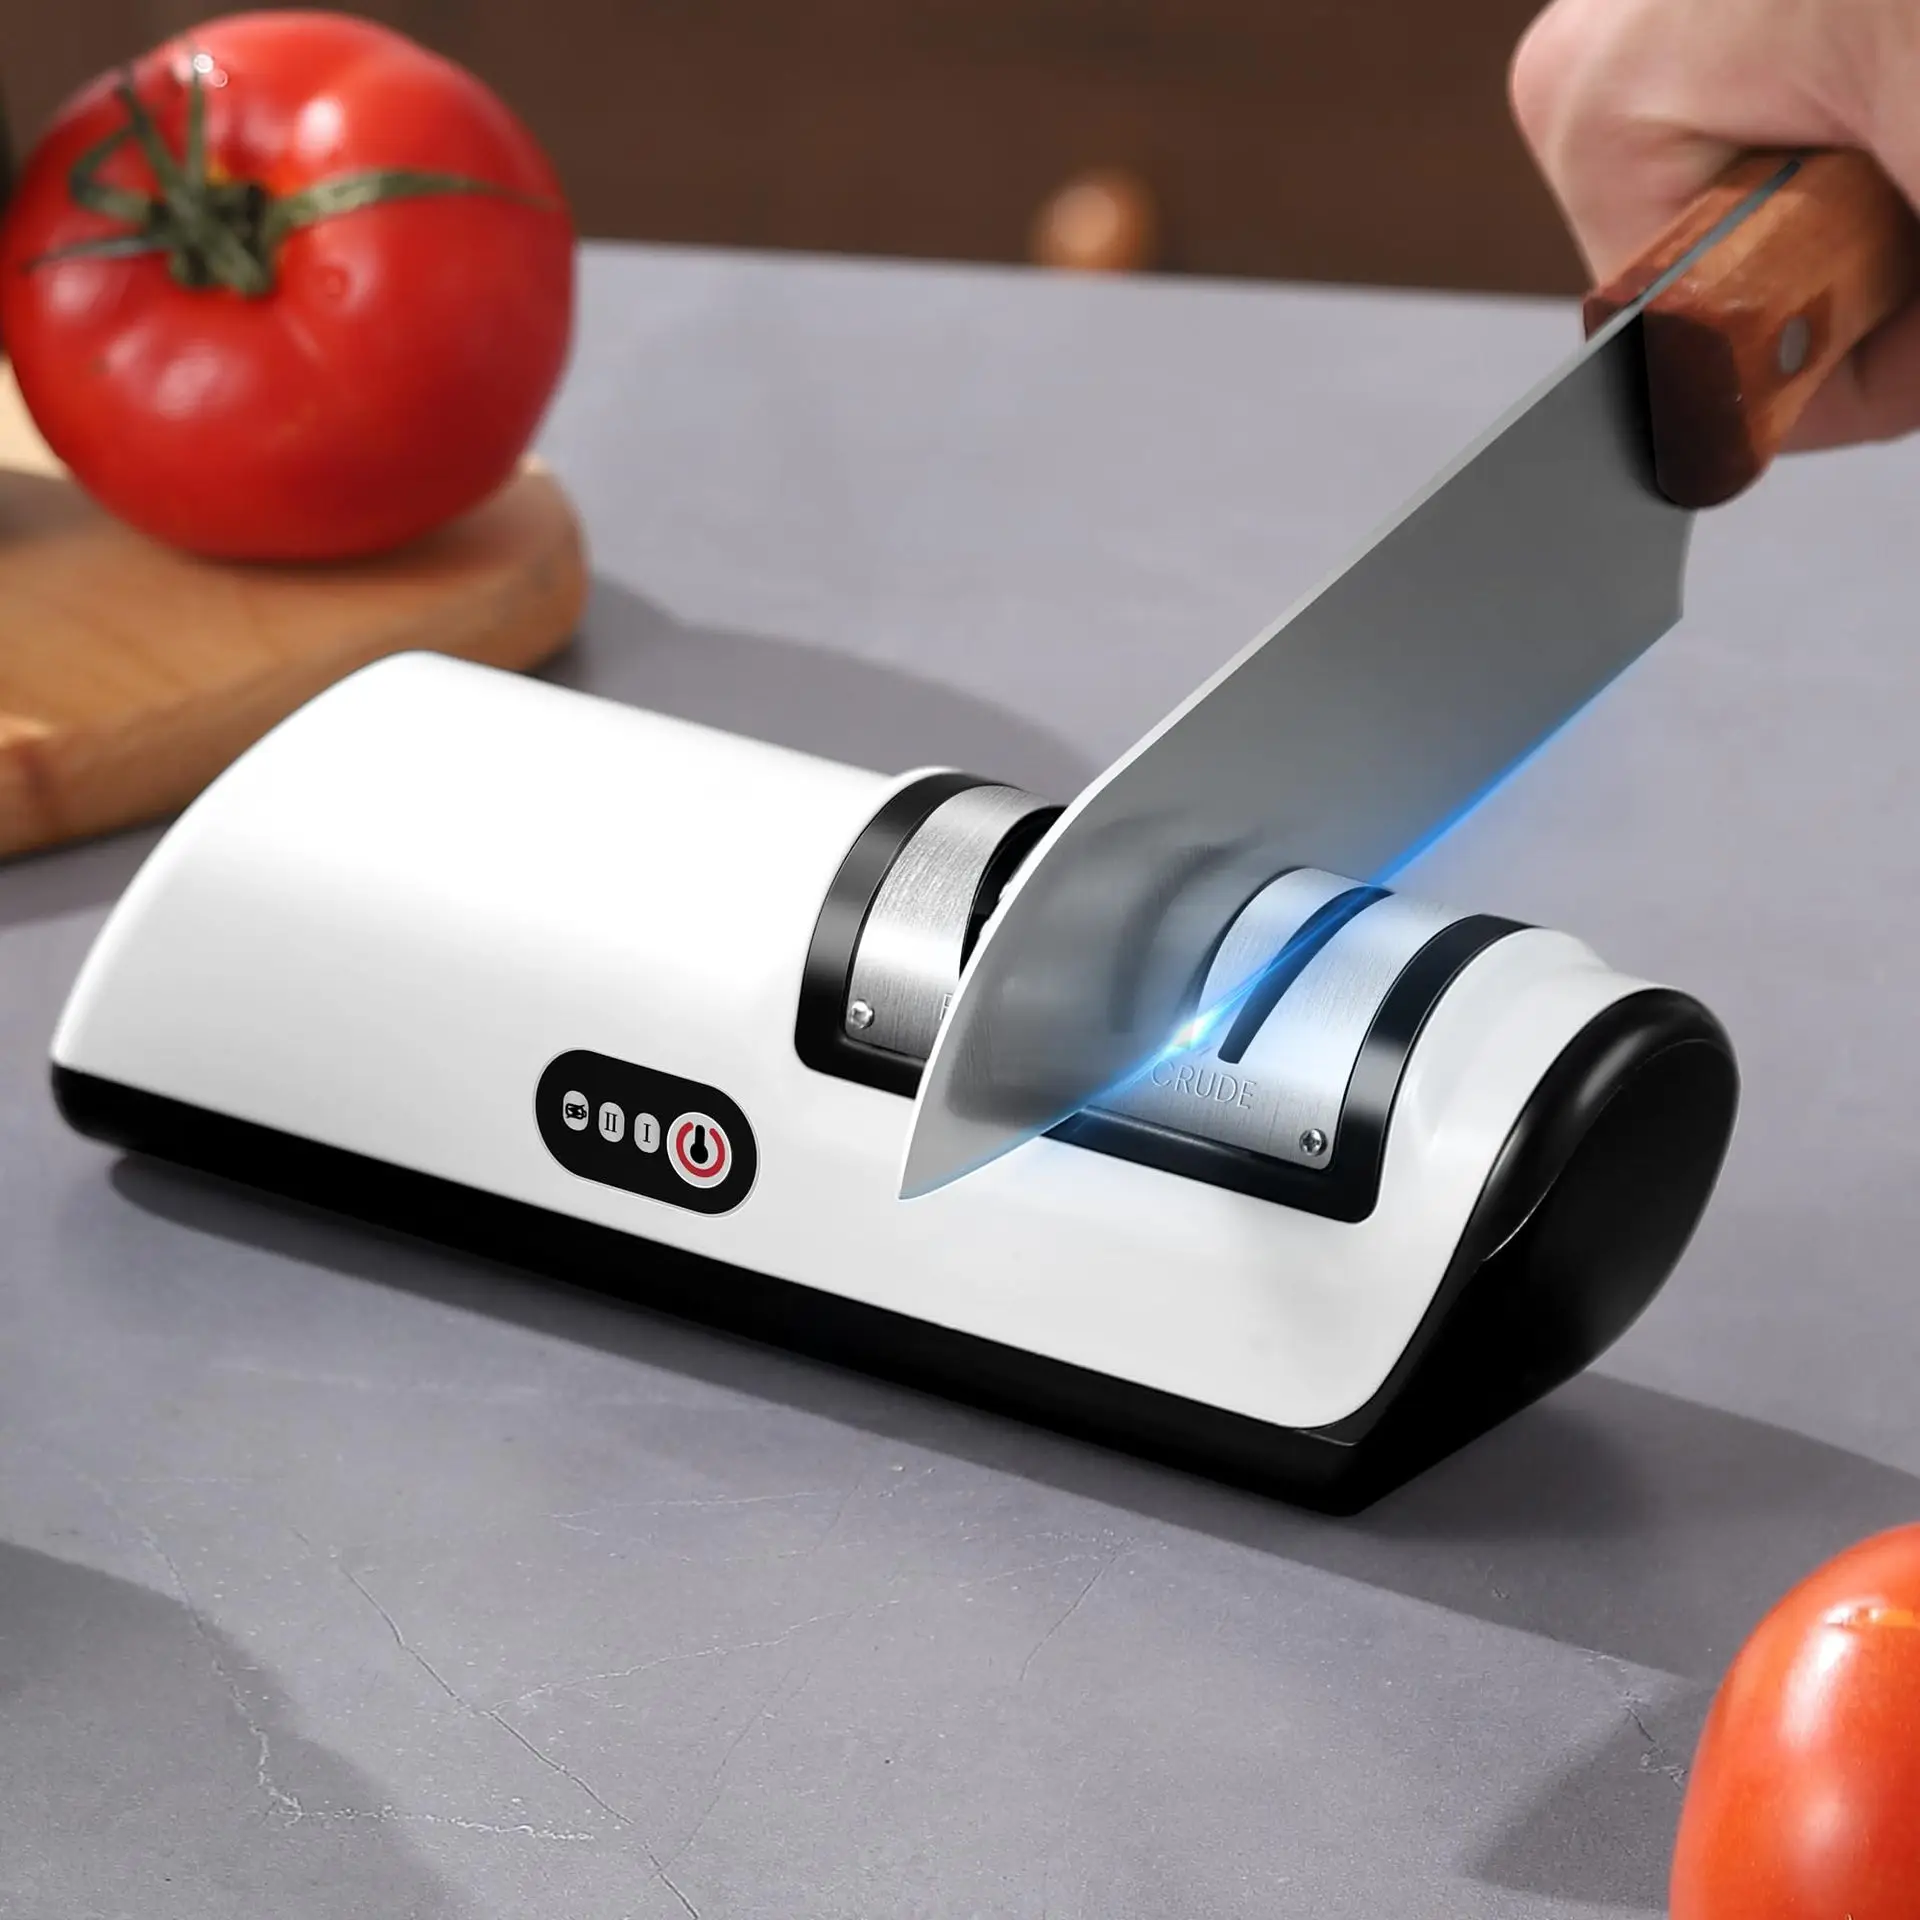 

Professional Electric Knife Sharpener, Multifunctional Automatic Cut Sharpeners, USB Charge for Kitchen Knives, Sharpening Tool